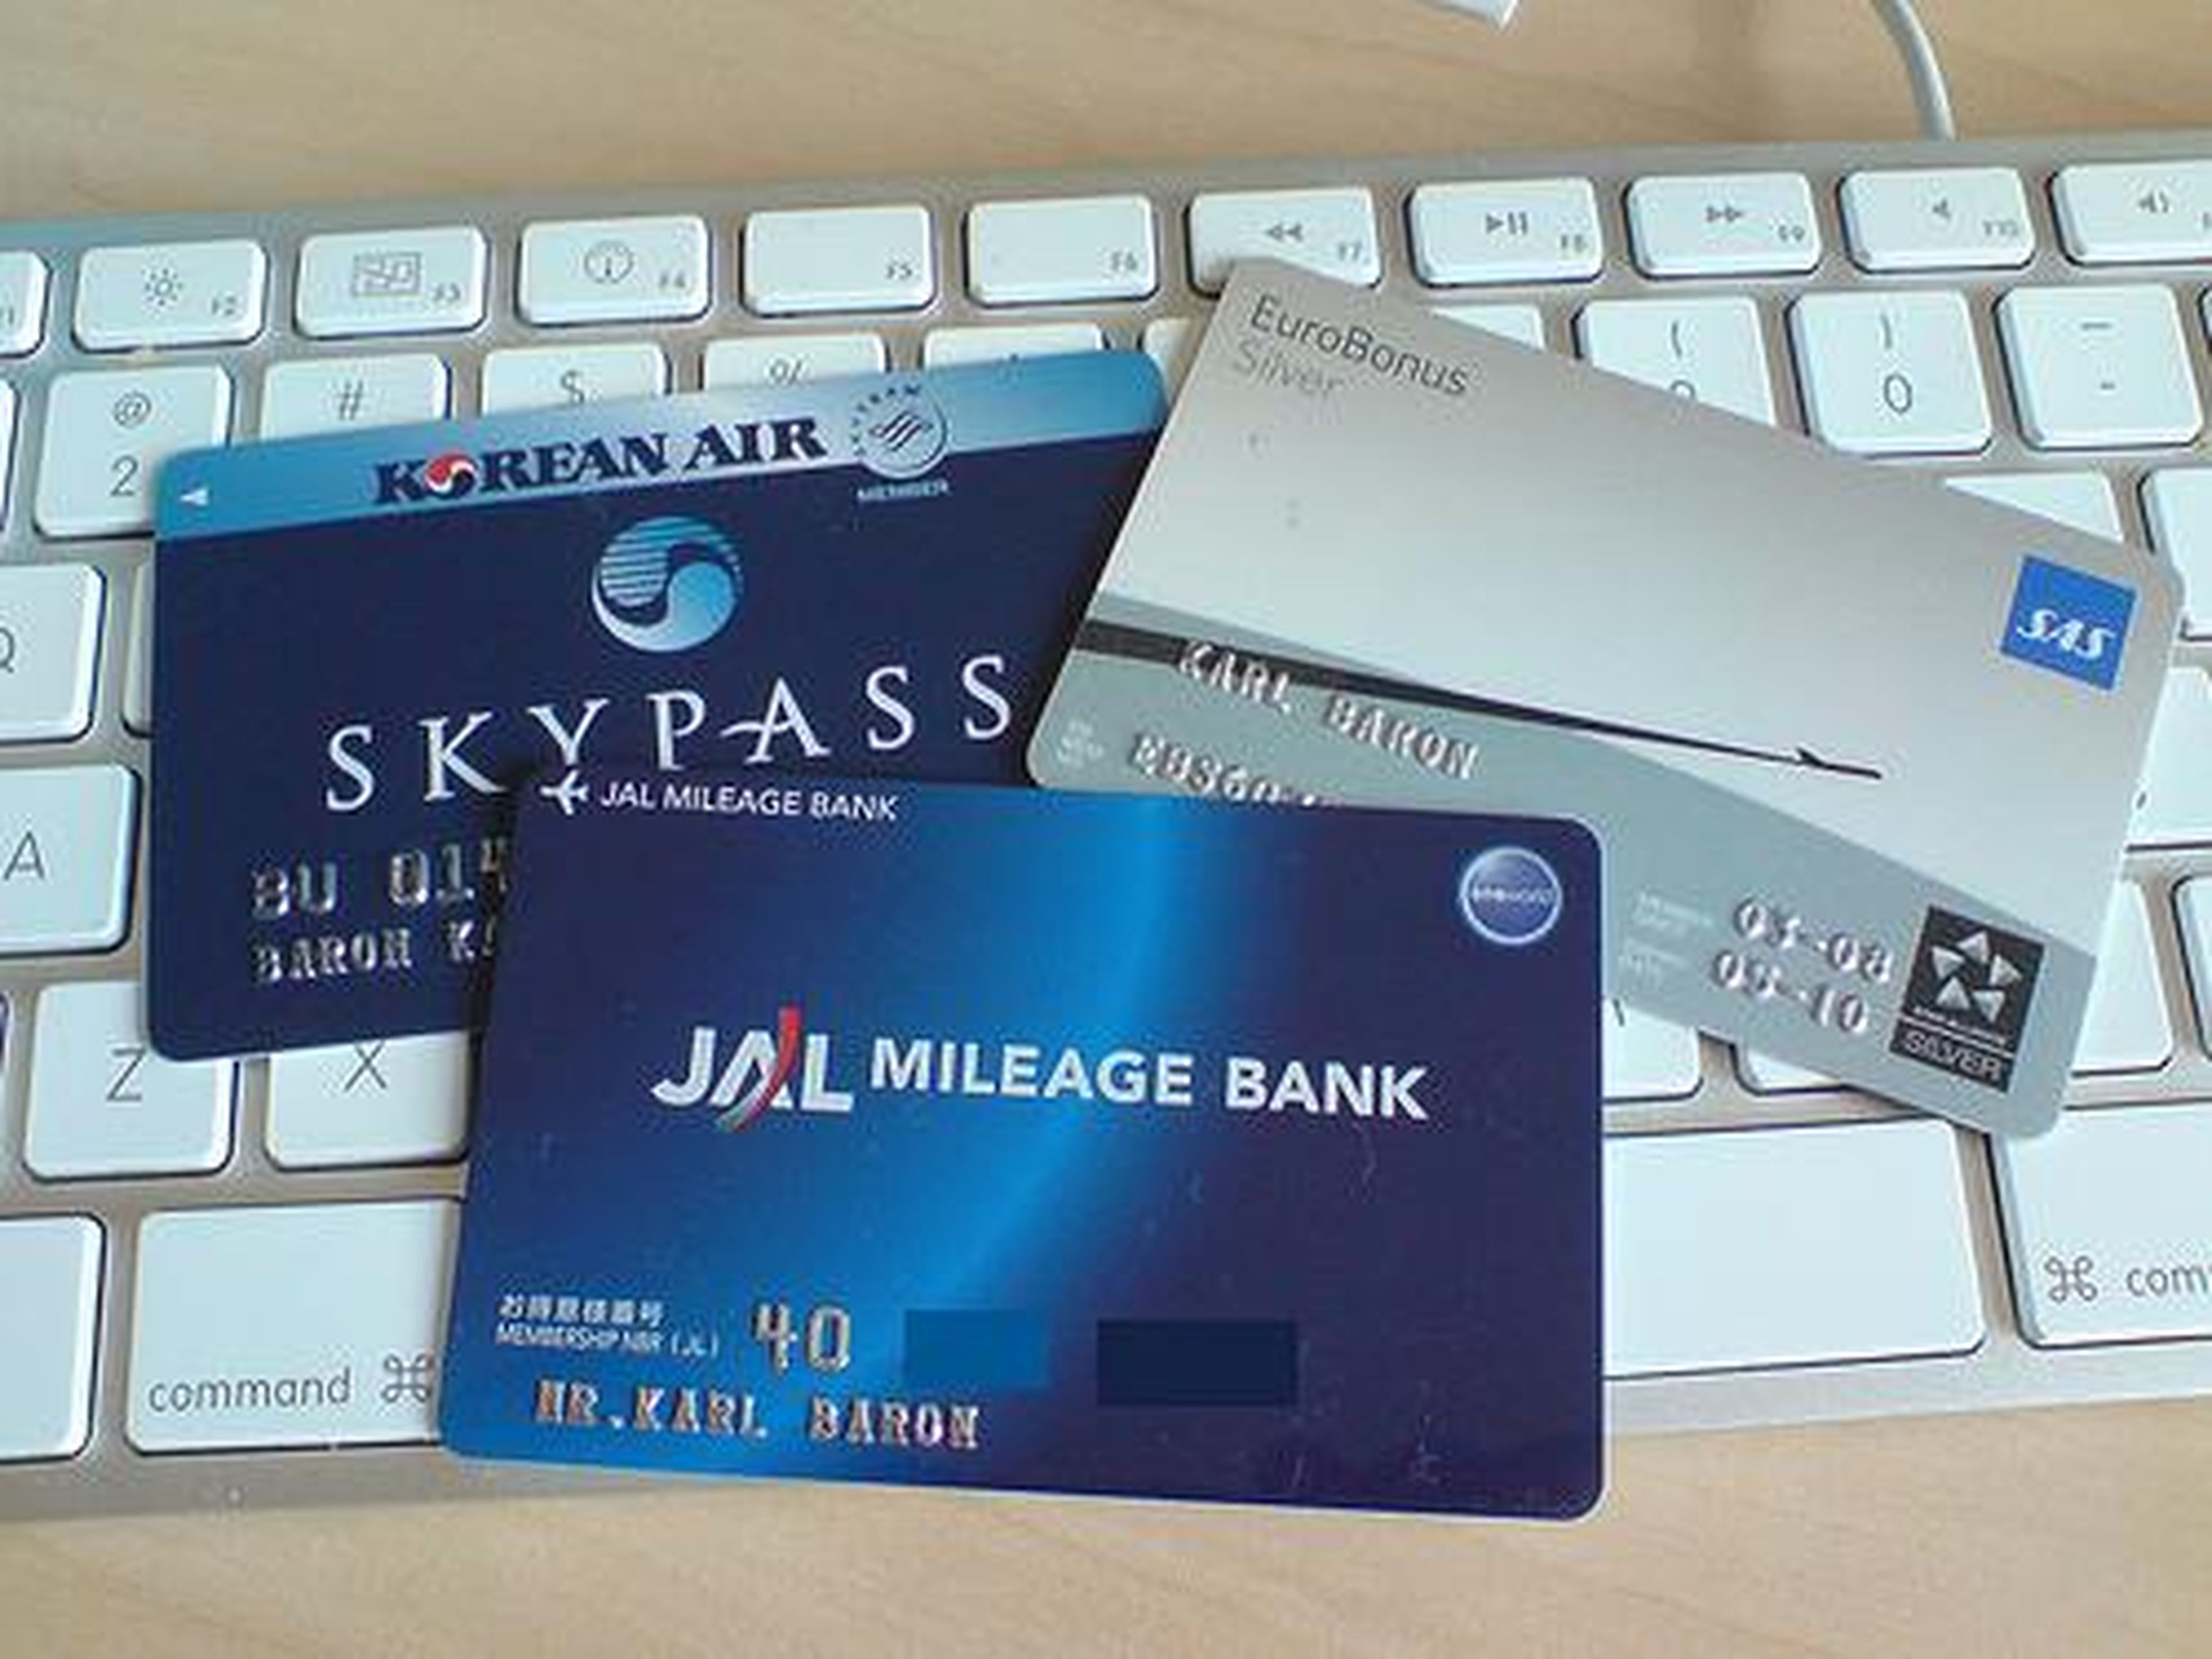 Use an airline-specific credit card.